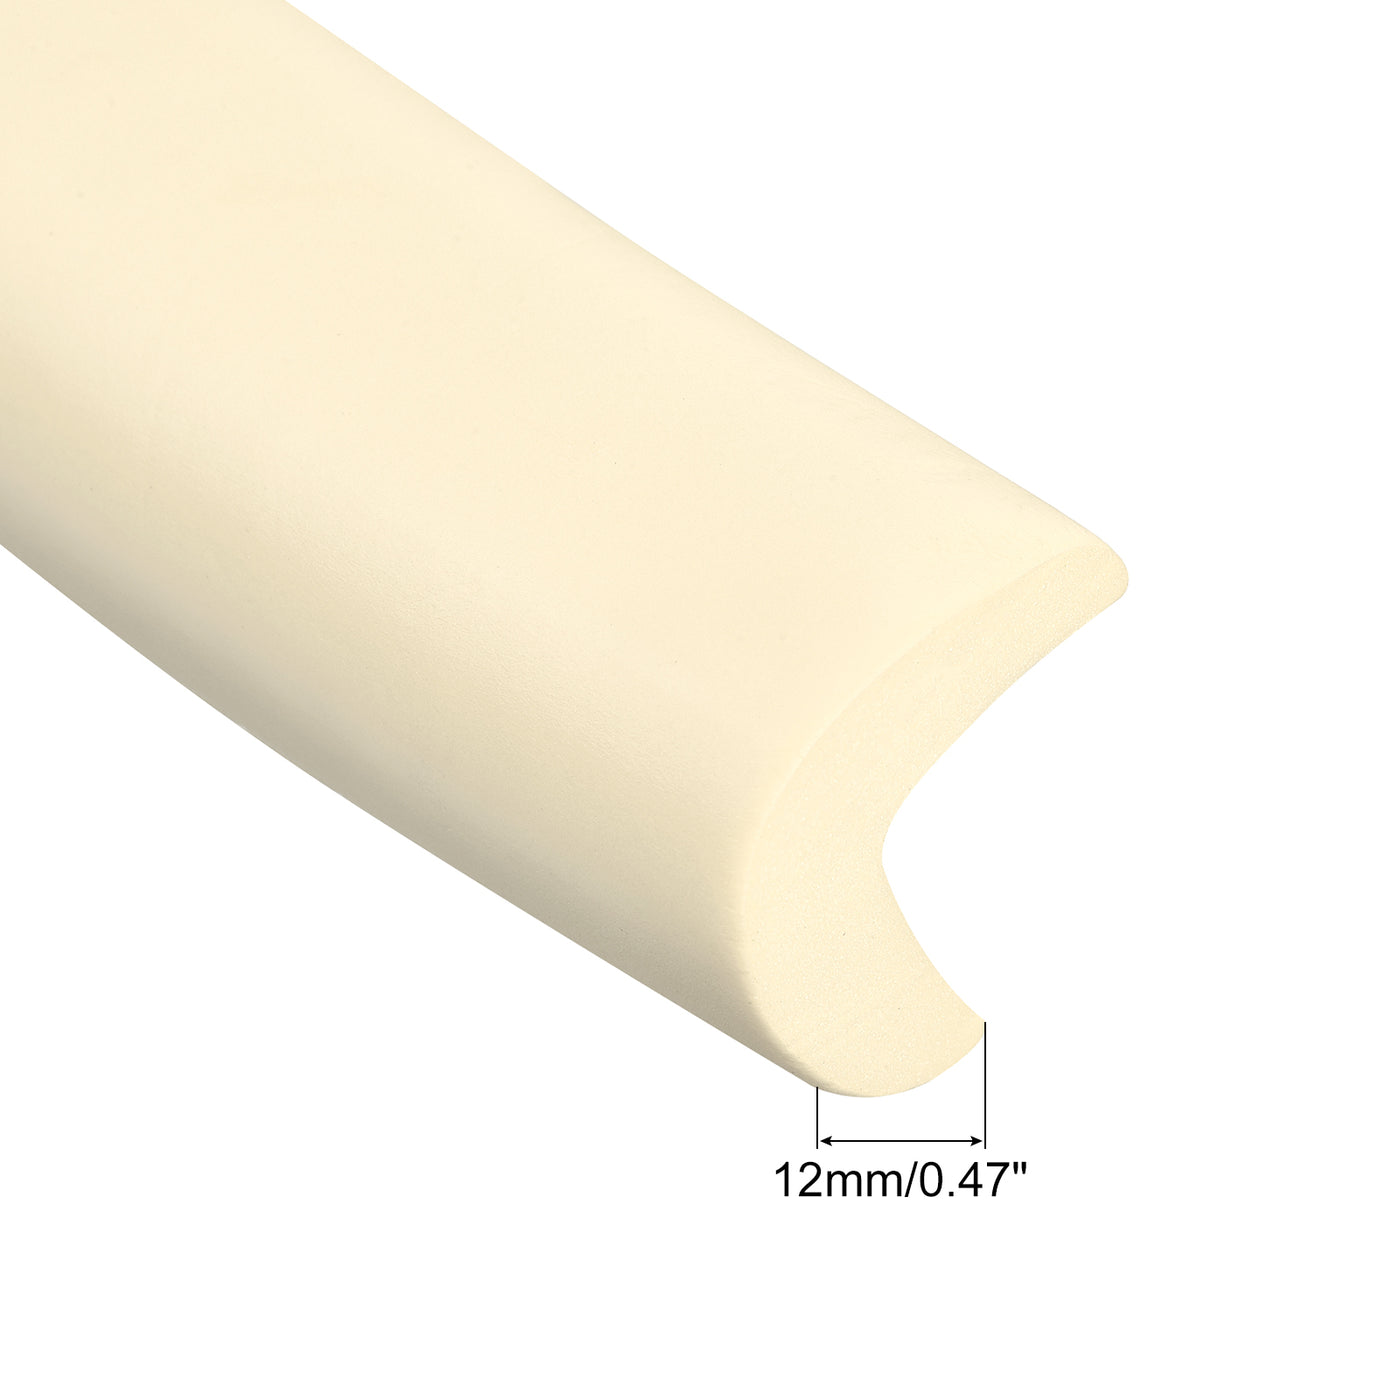 uxcell Uxcell Corner Guards Edge Protectors 6.56ft(2M), Foam Safety Bumper Beige